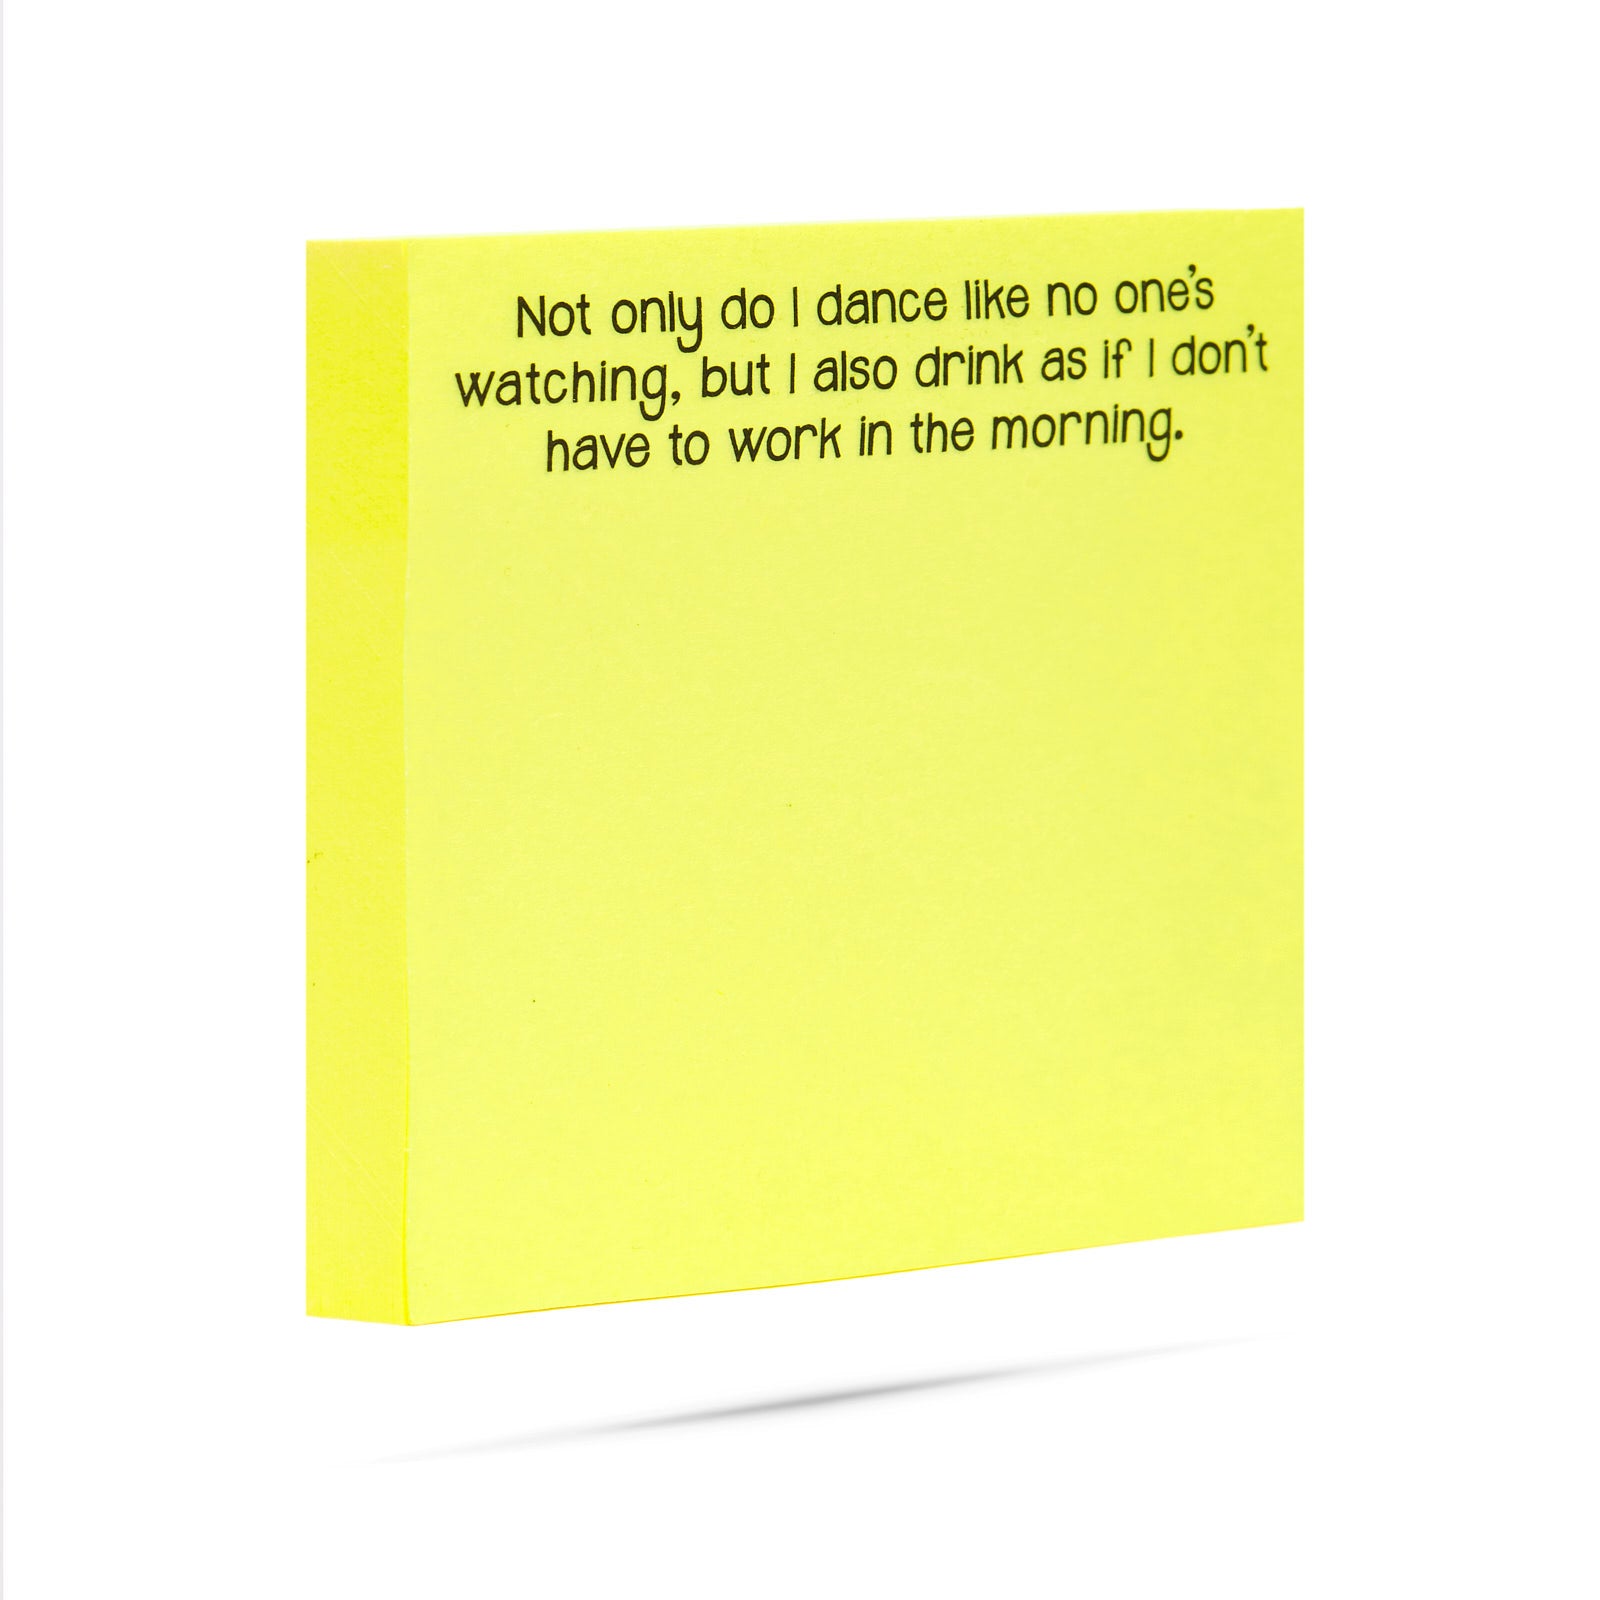 Not only do I dance like no one's watching, but I also drink as if I don't have to work in the morning 100 sheet sticky note pad